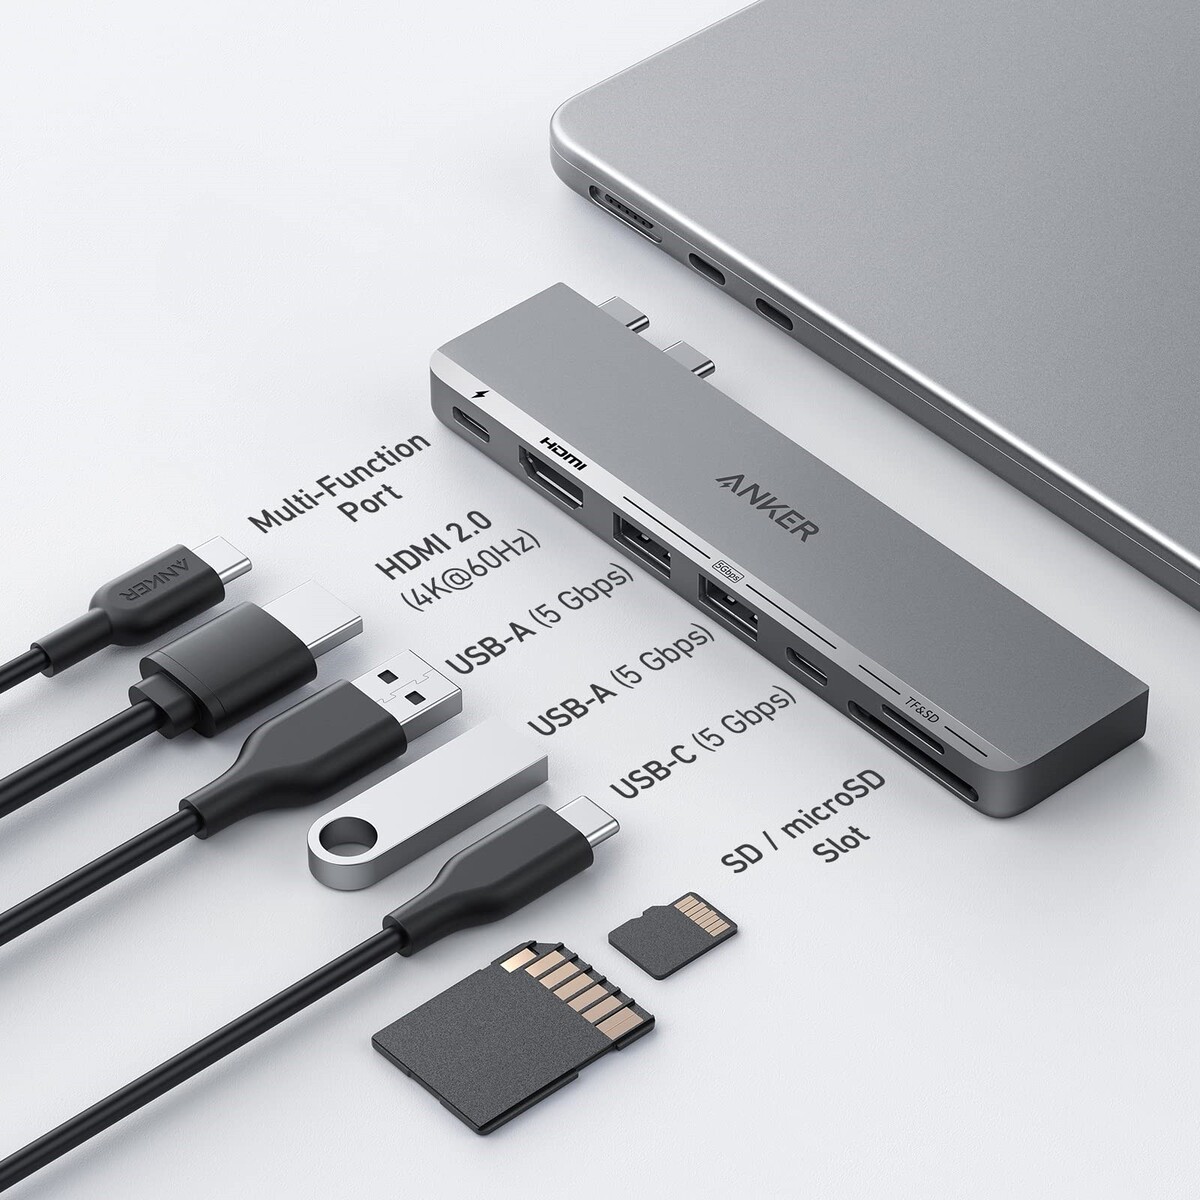 New Anker 547 USB-C Hub (7-in-2) optimized for recent - NotebookCheck.net News